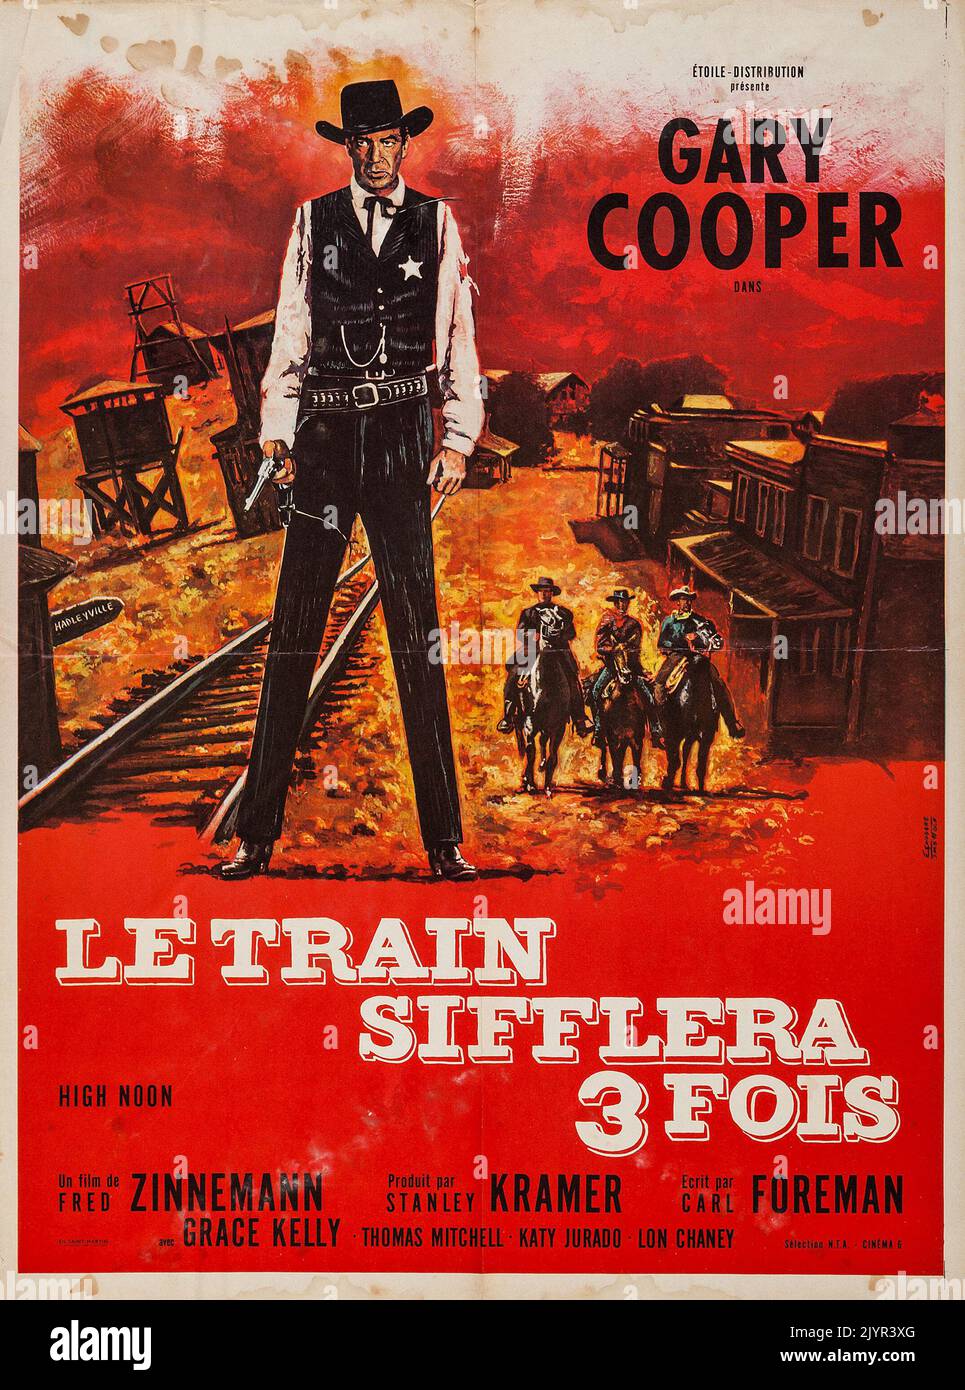 High Noon 1952 (Etoile, R-1962). French movie poster feat Gary Cooper - Western movie Stock Photo